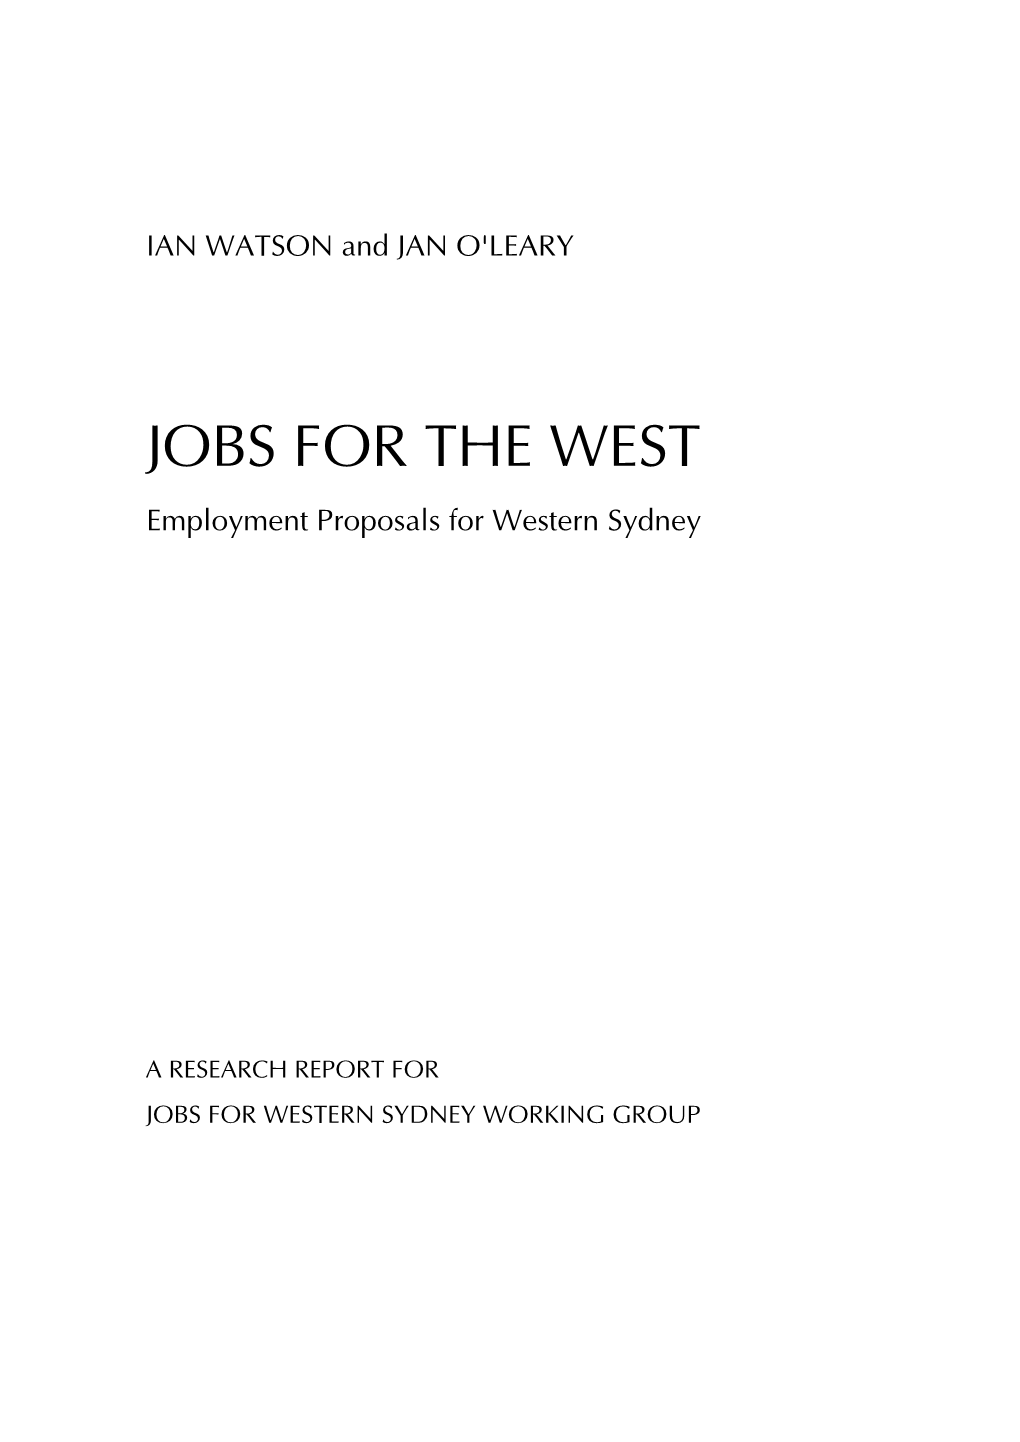 JOBS for the WEST Employment Proposals for Western Sydney